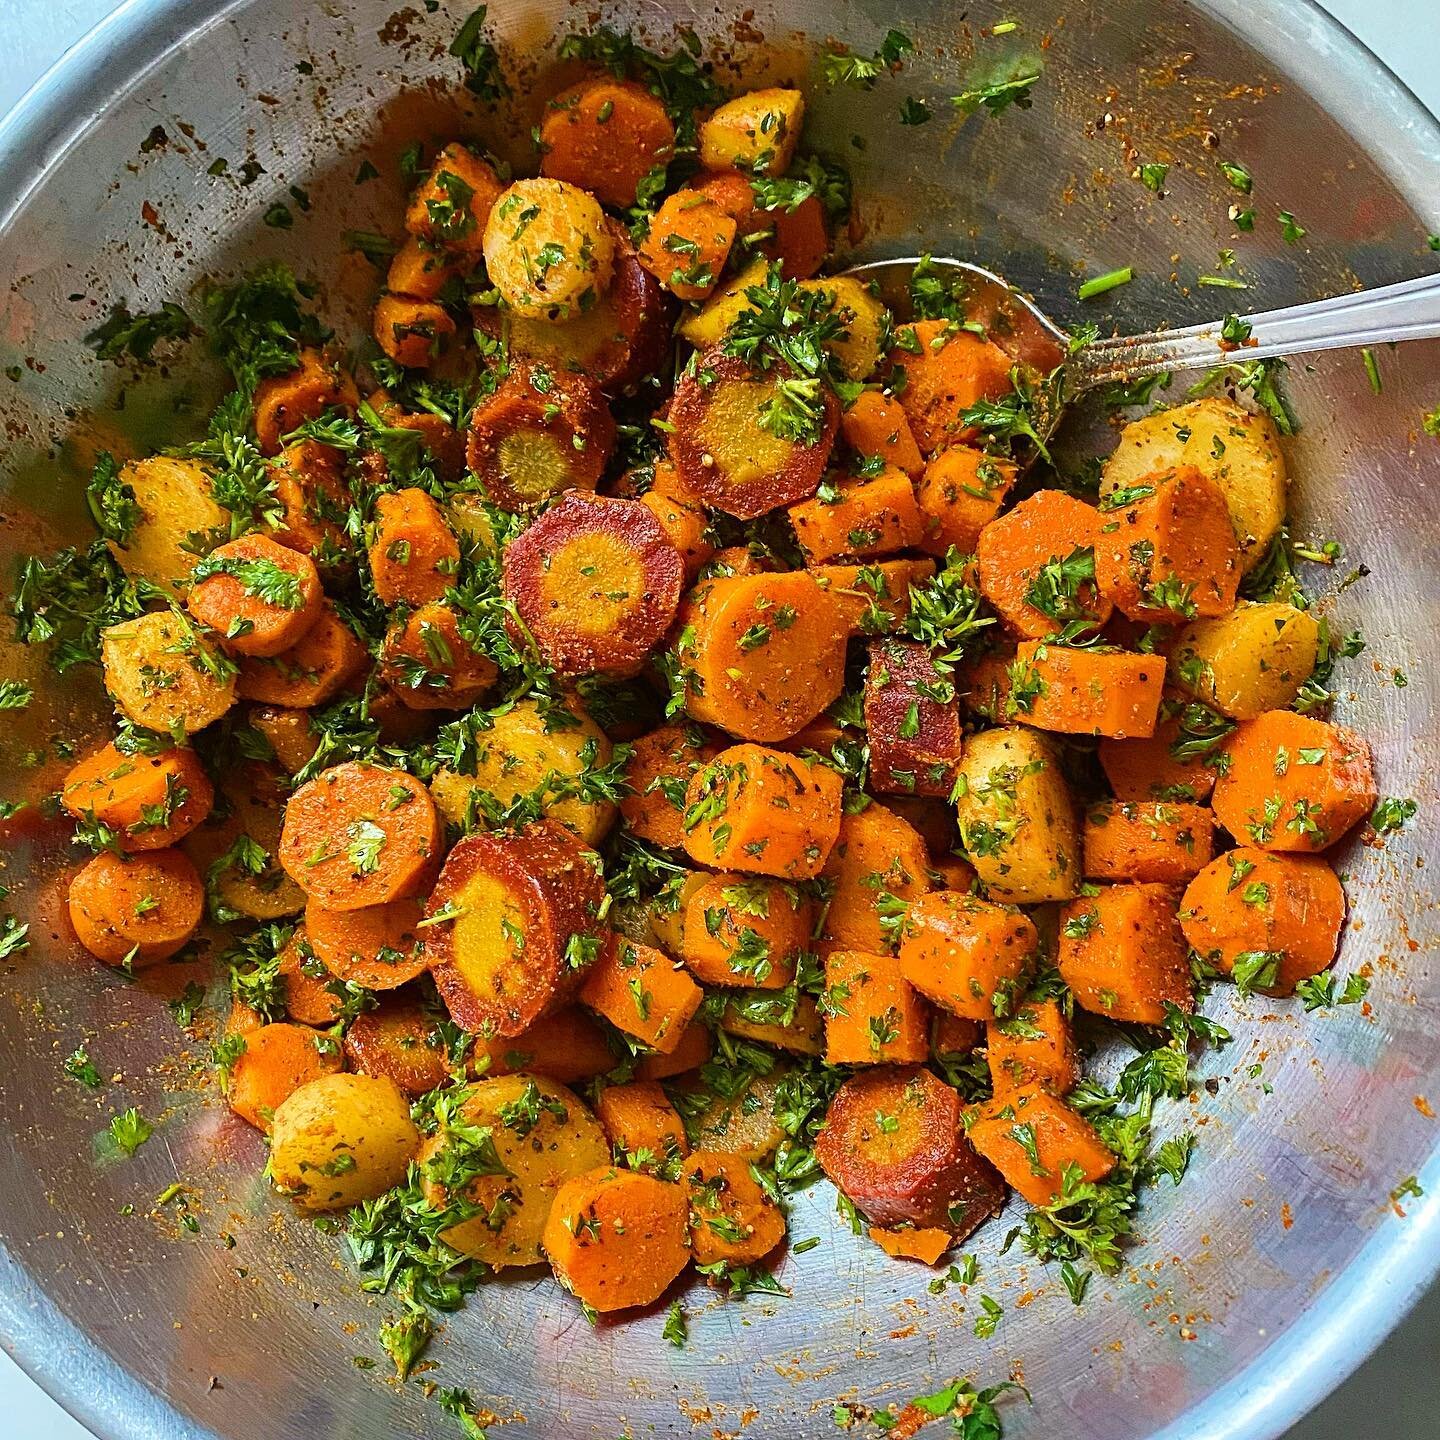 Moroccan Carrot Salad 🥕🥕🥕 is even prettier when using tri-color bag of carrots🥕🥕🥕 Boil carrot 1/2&rdquo; rings for about 5 min or just until al dente, drain. Add chopped parsley 🌿 salt, pepper, cumin, paprika, chili powder and 1/4 cup olive oi